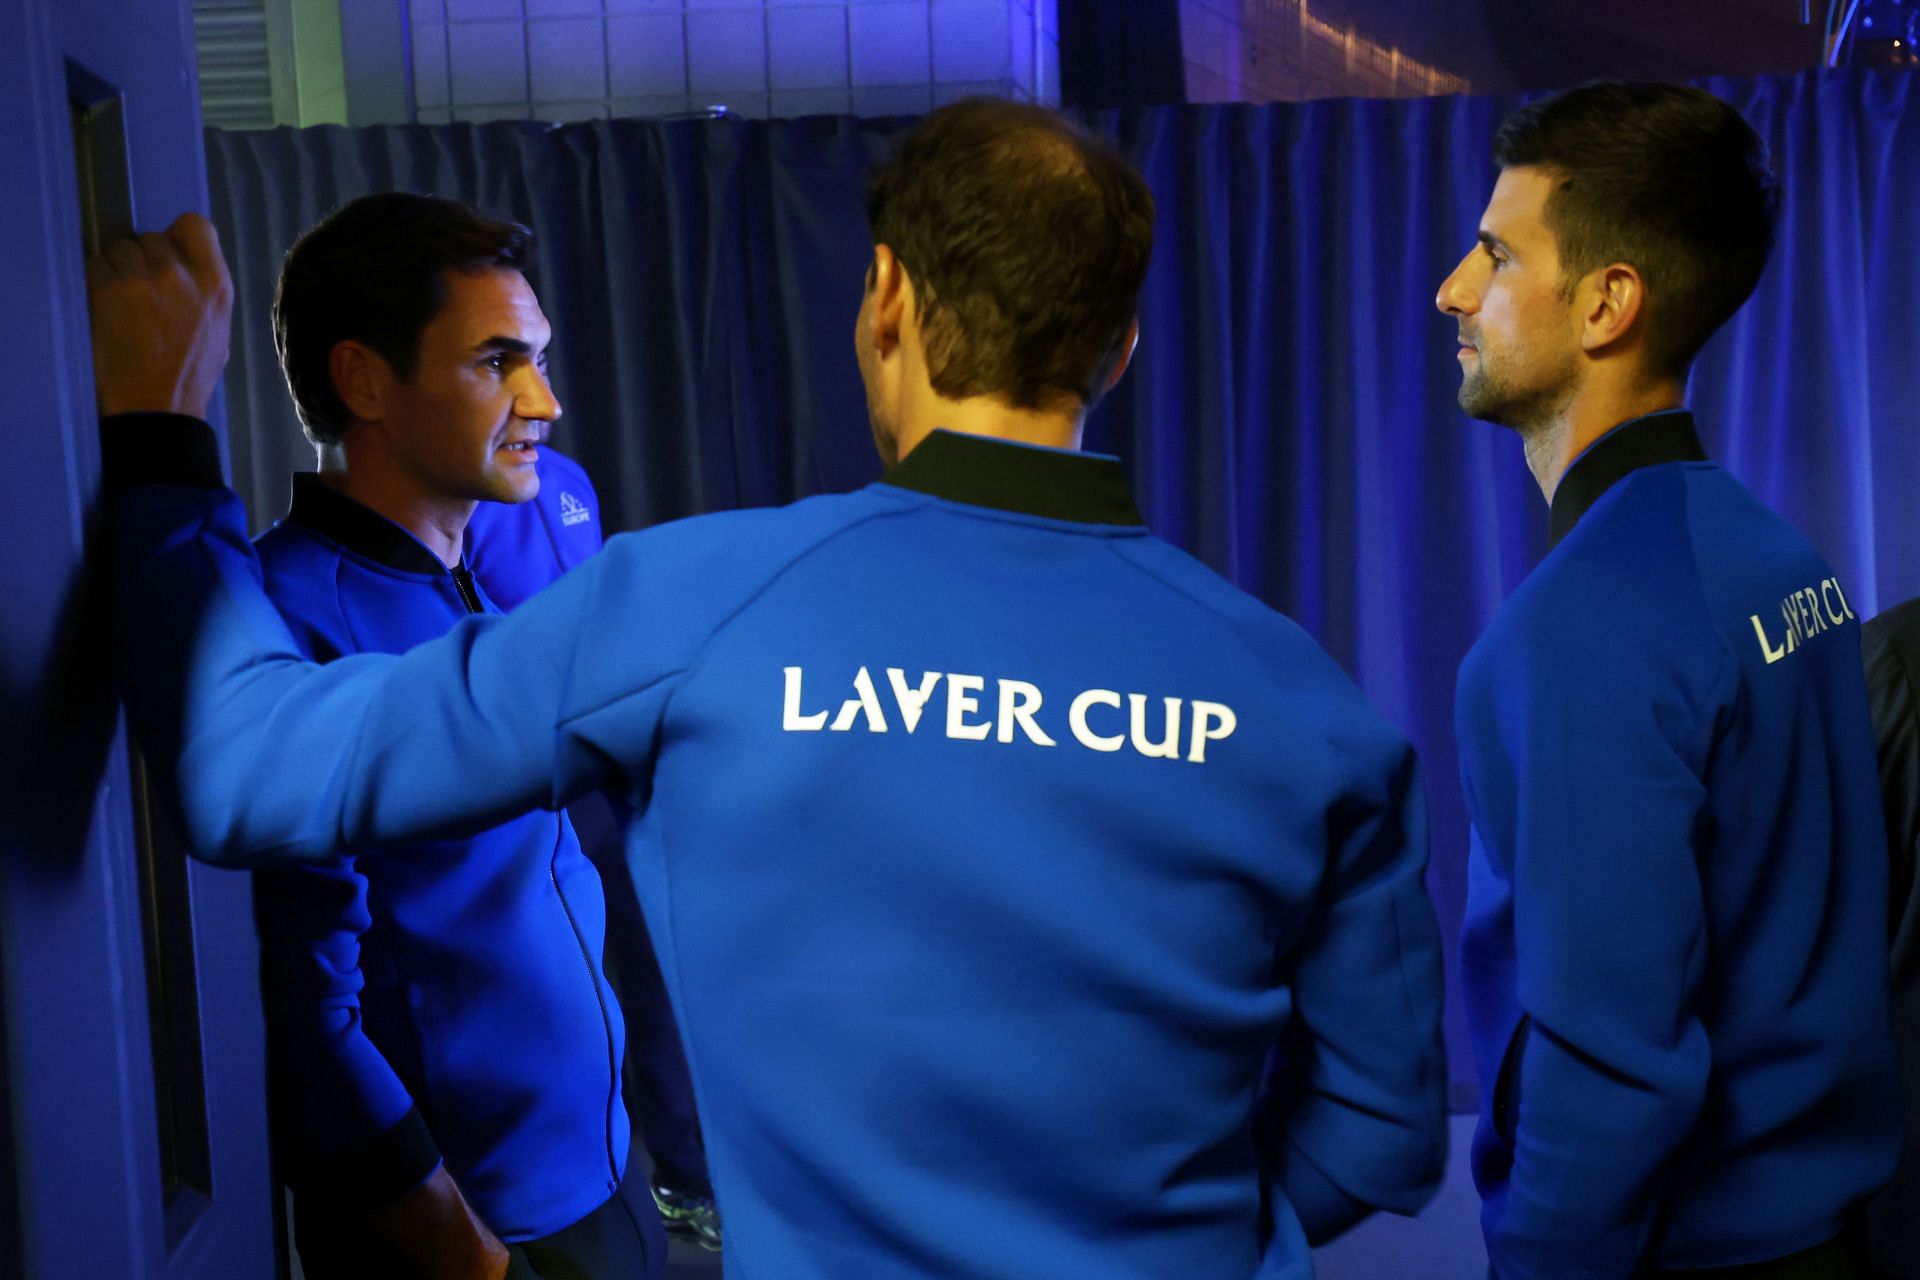 The Big 3 at Laver Cup 2022